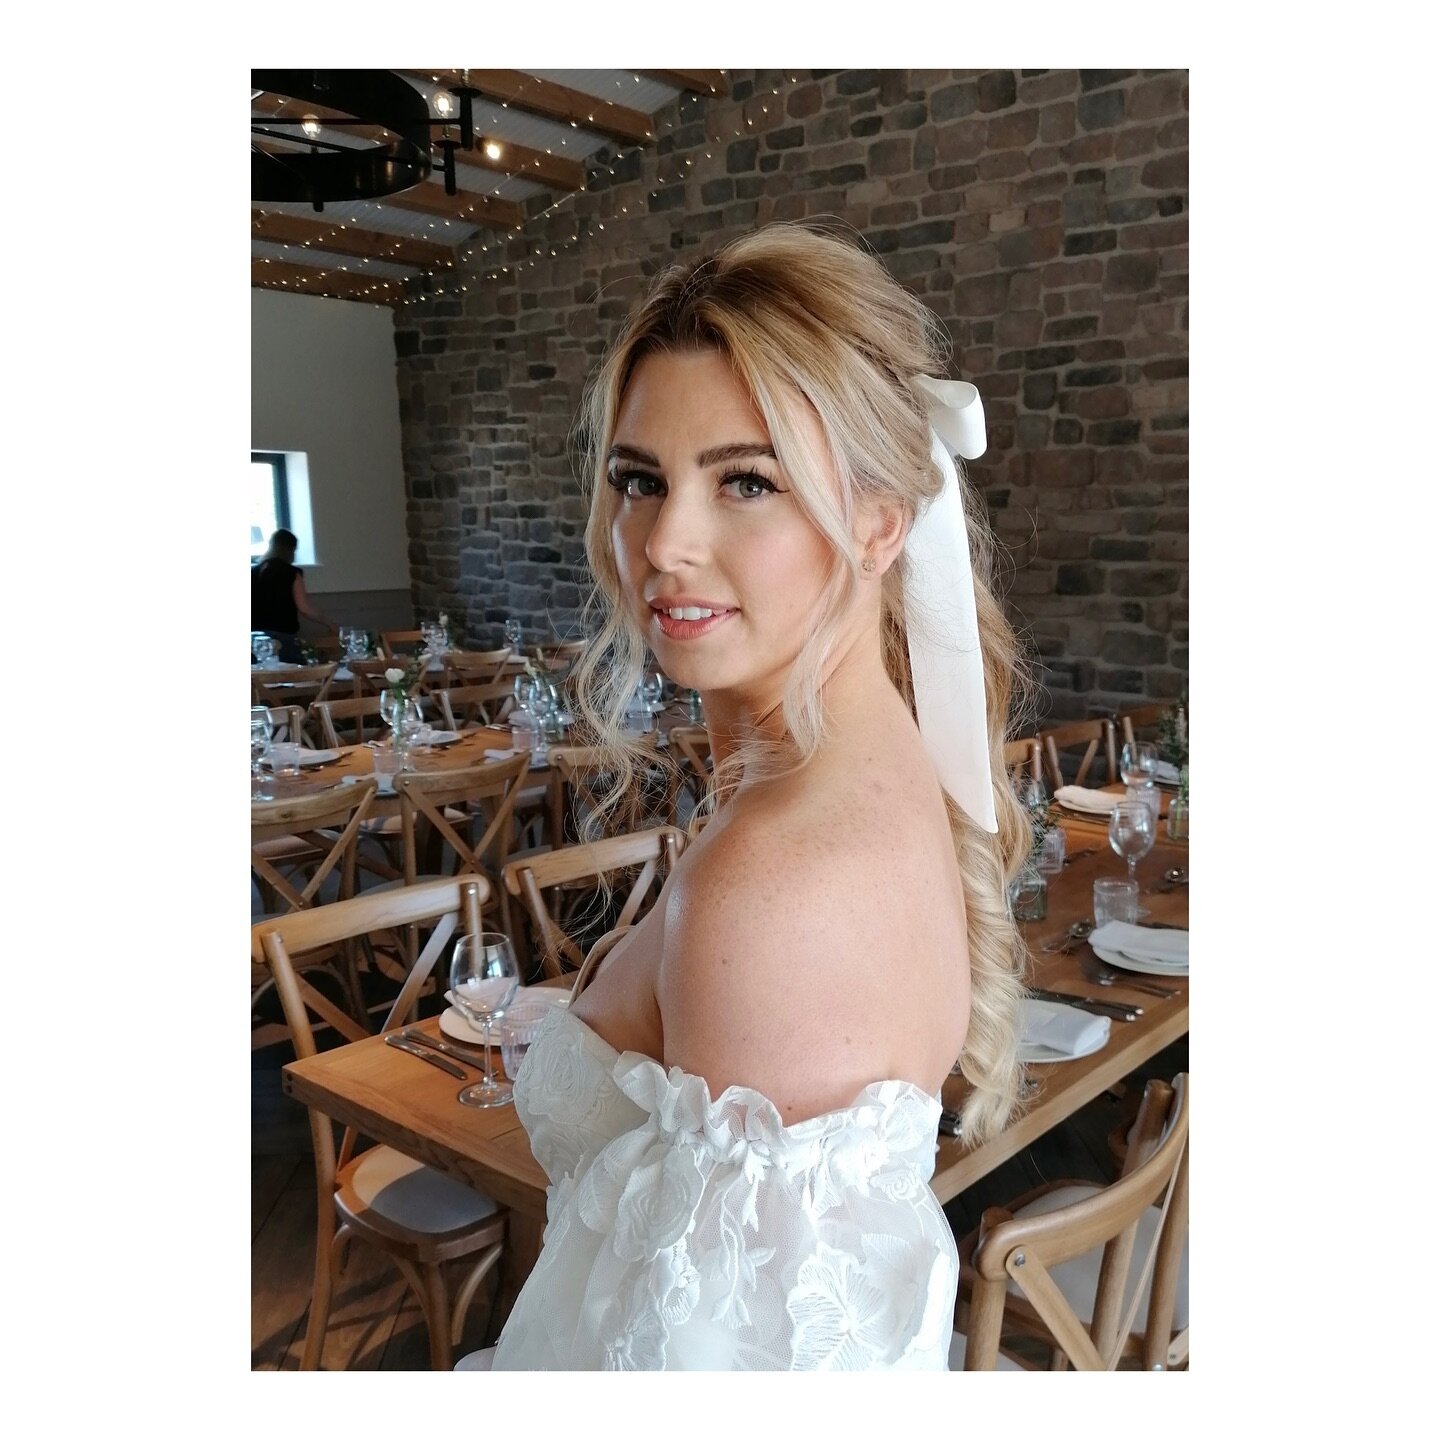 Trial season is in full swing. I love seeing and talking through plans and styling ideas for the upcoming season. Ponytails and sleek buns are definitely going to make an appearance but all with individual tweaks to make them special to each bride, a